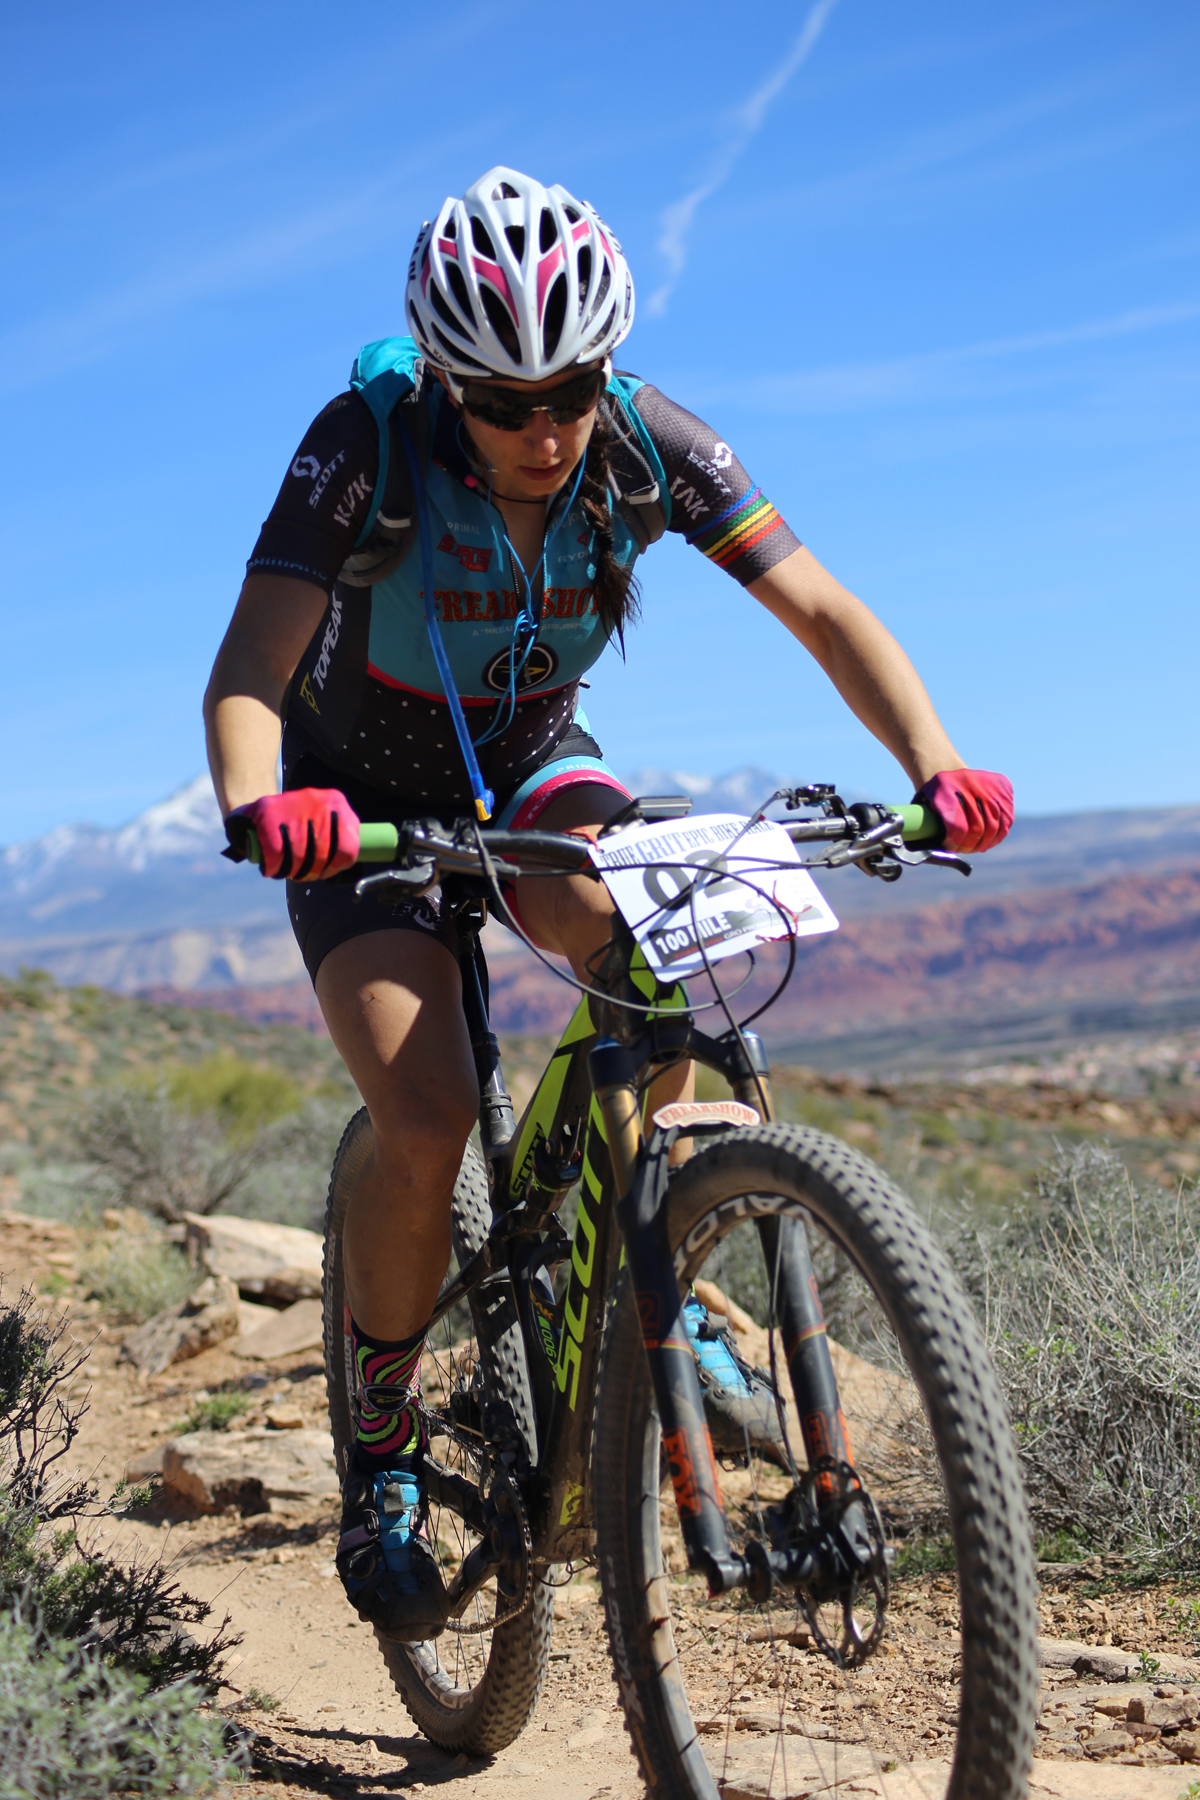 Sonya Looney battled back from an earyly mechanical and overheating to finish 4th in the 100 miler in the 2017 True Grit Mountain Bike Race. Photo by CrawlingSpider.com, find your photo from the race.